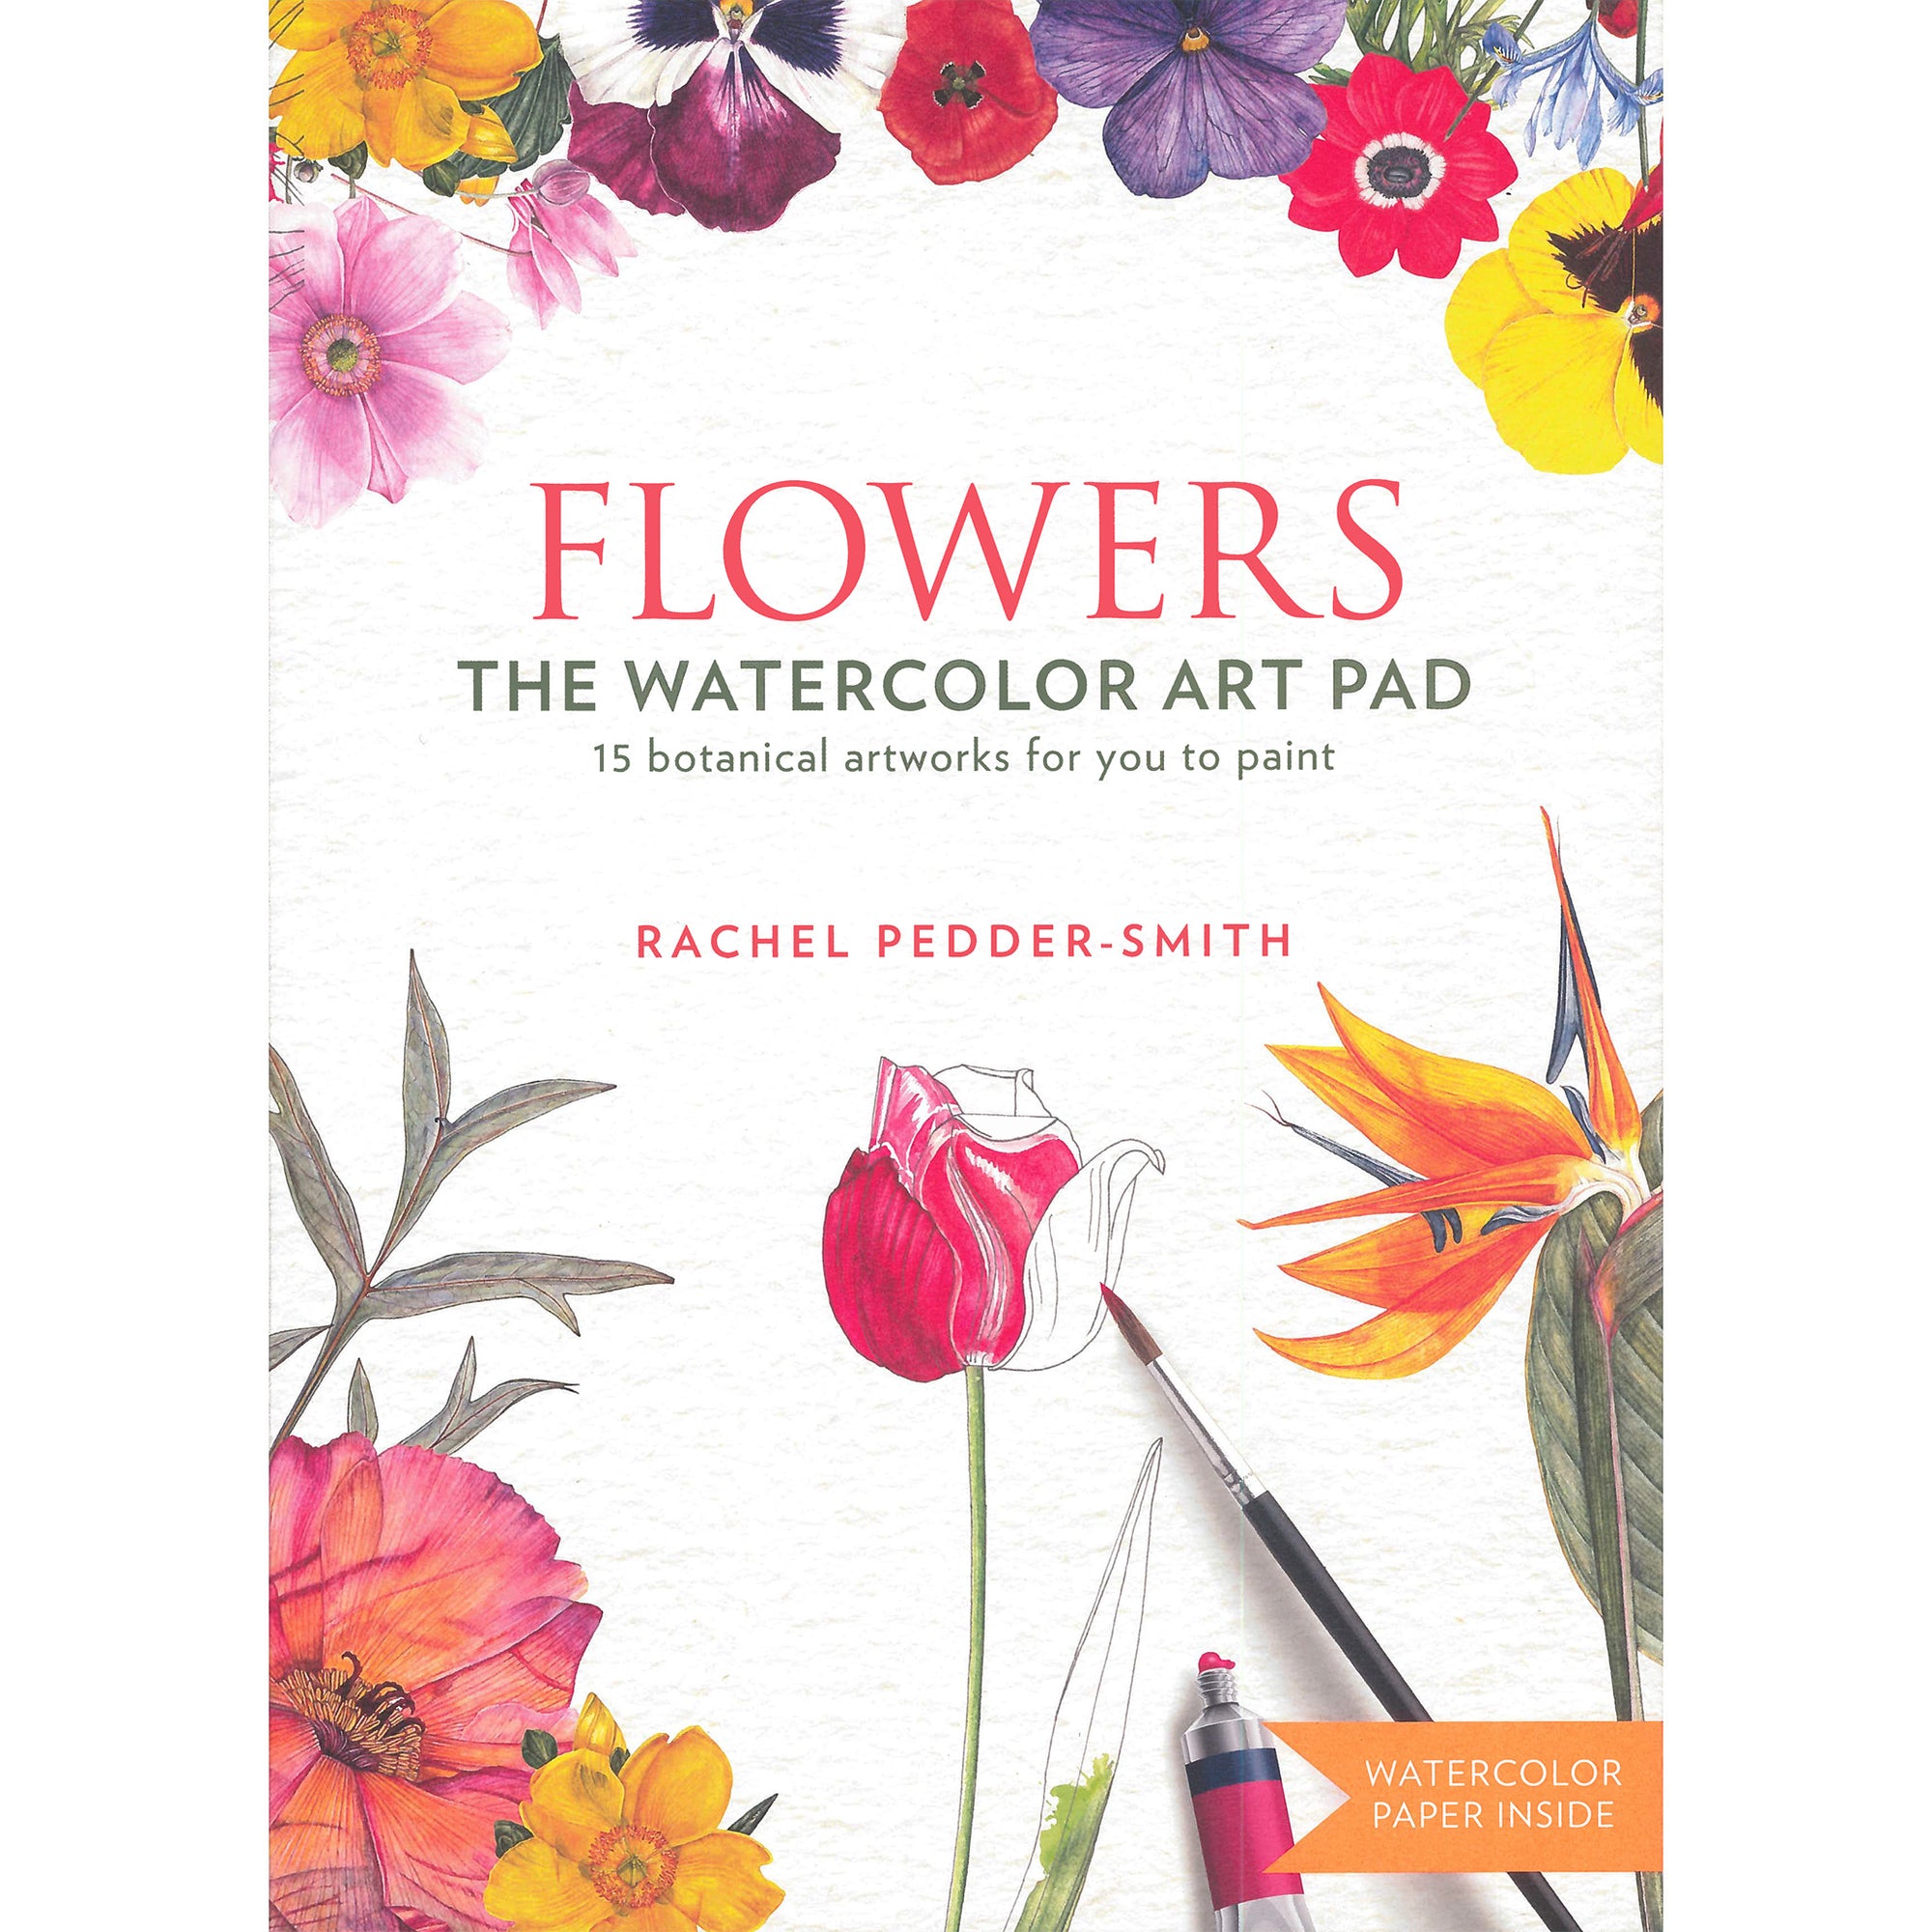 Watercolor Workbook: Flowers, Feathers, and Animal Friends: 25 Beginner-Friendly Projects on Premium Watercolor Paper [Book]